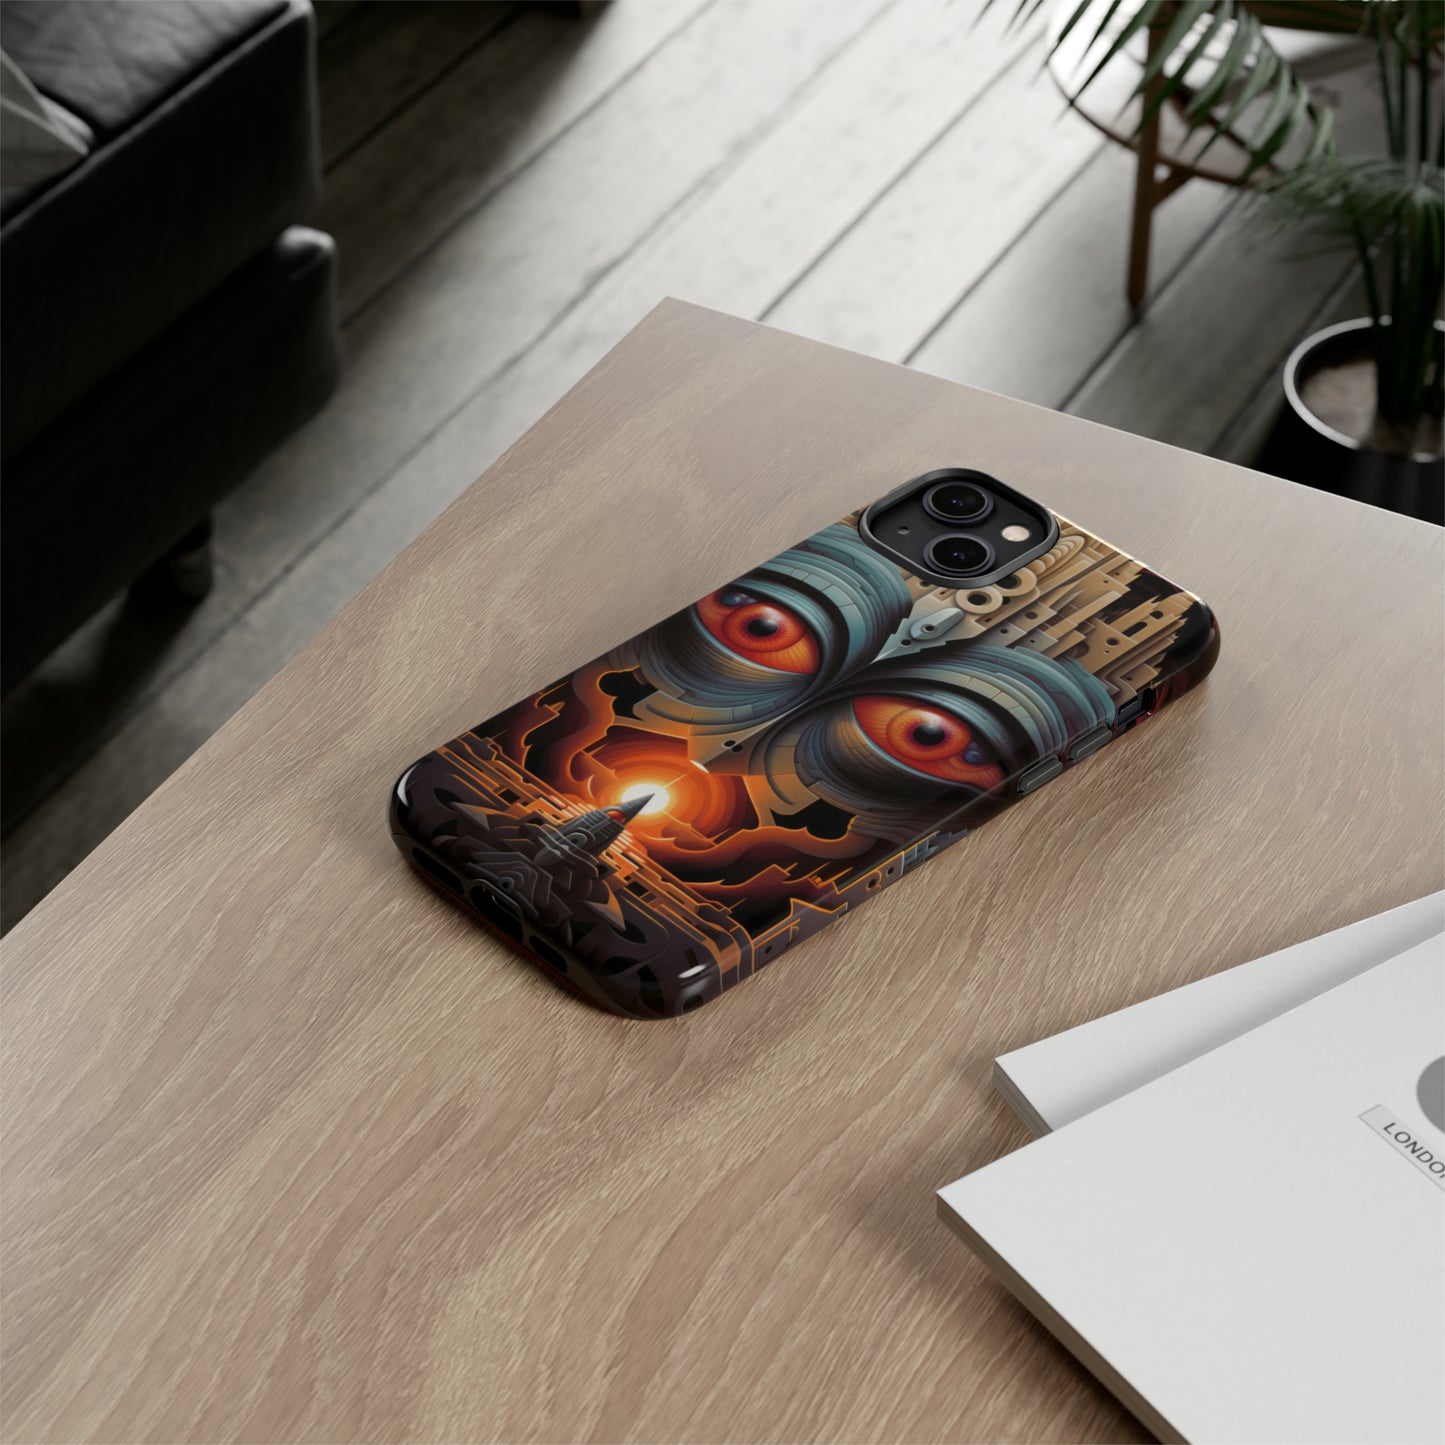 Temple of Watchful Eyes Phone Case - Floating Sanctuary Over Barren Terrain for iPhone, Samsung, Pixel